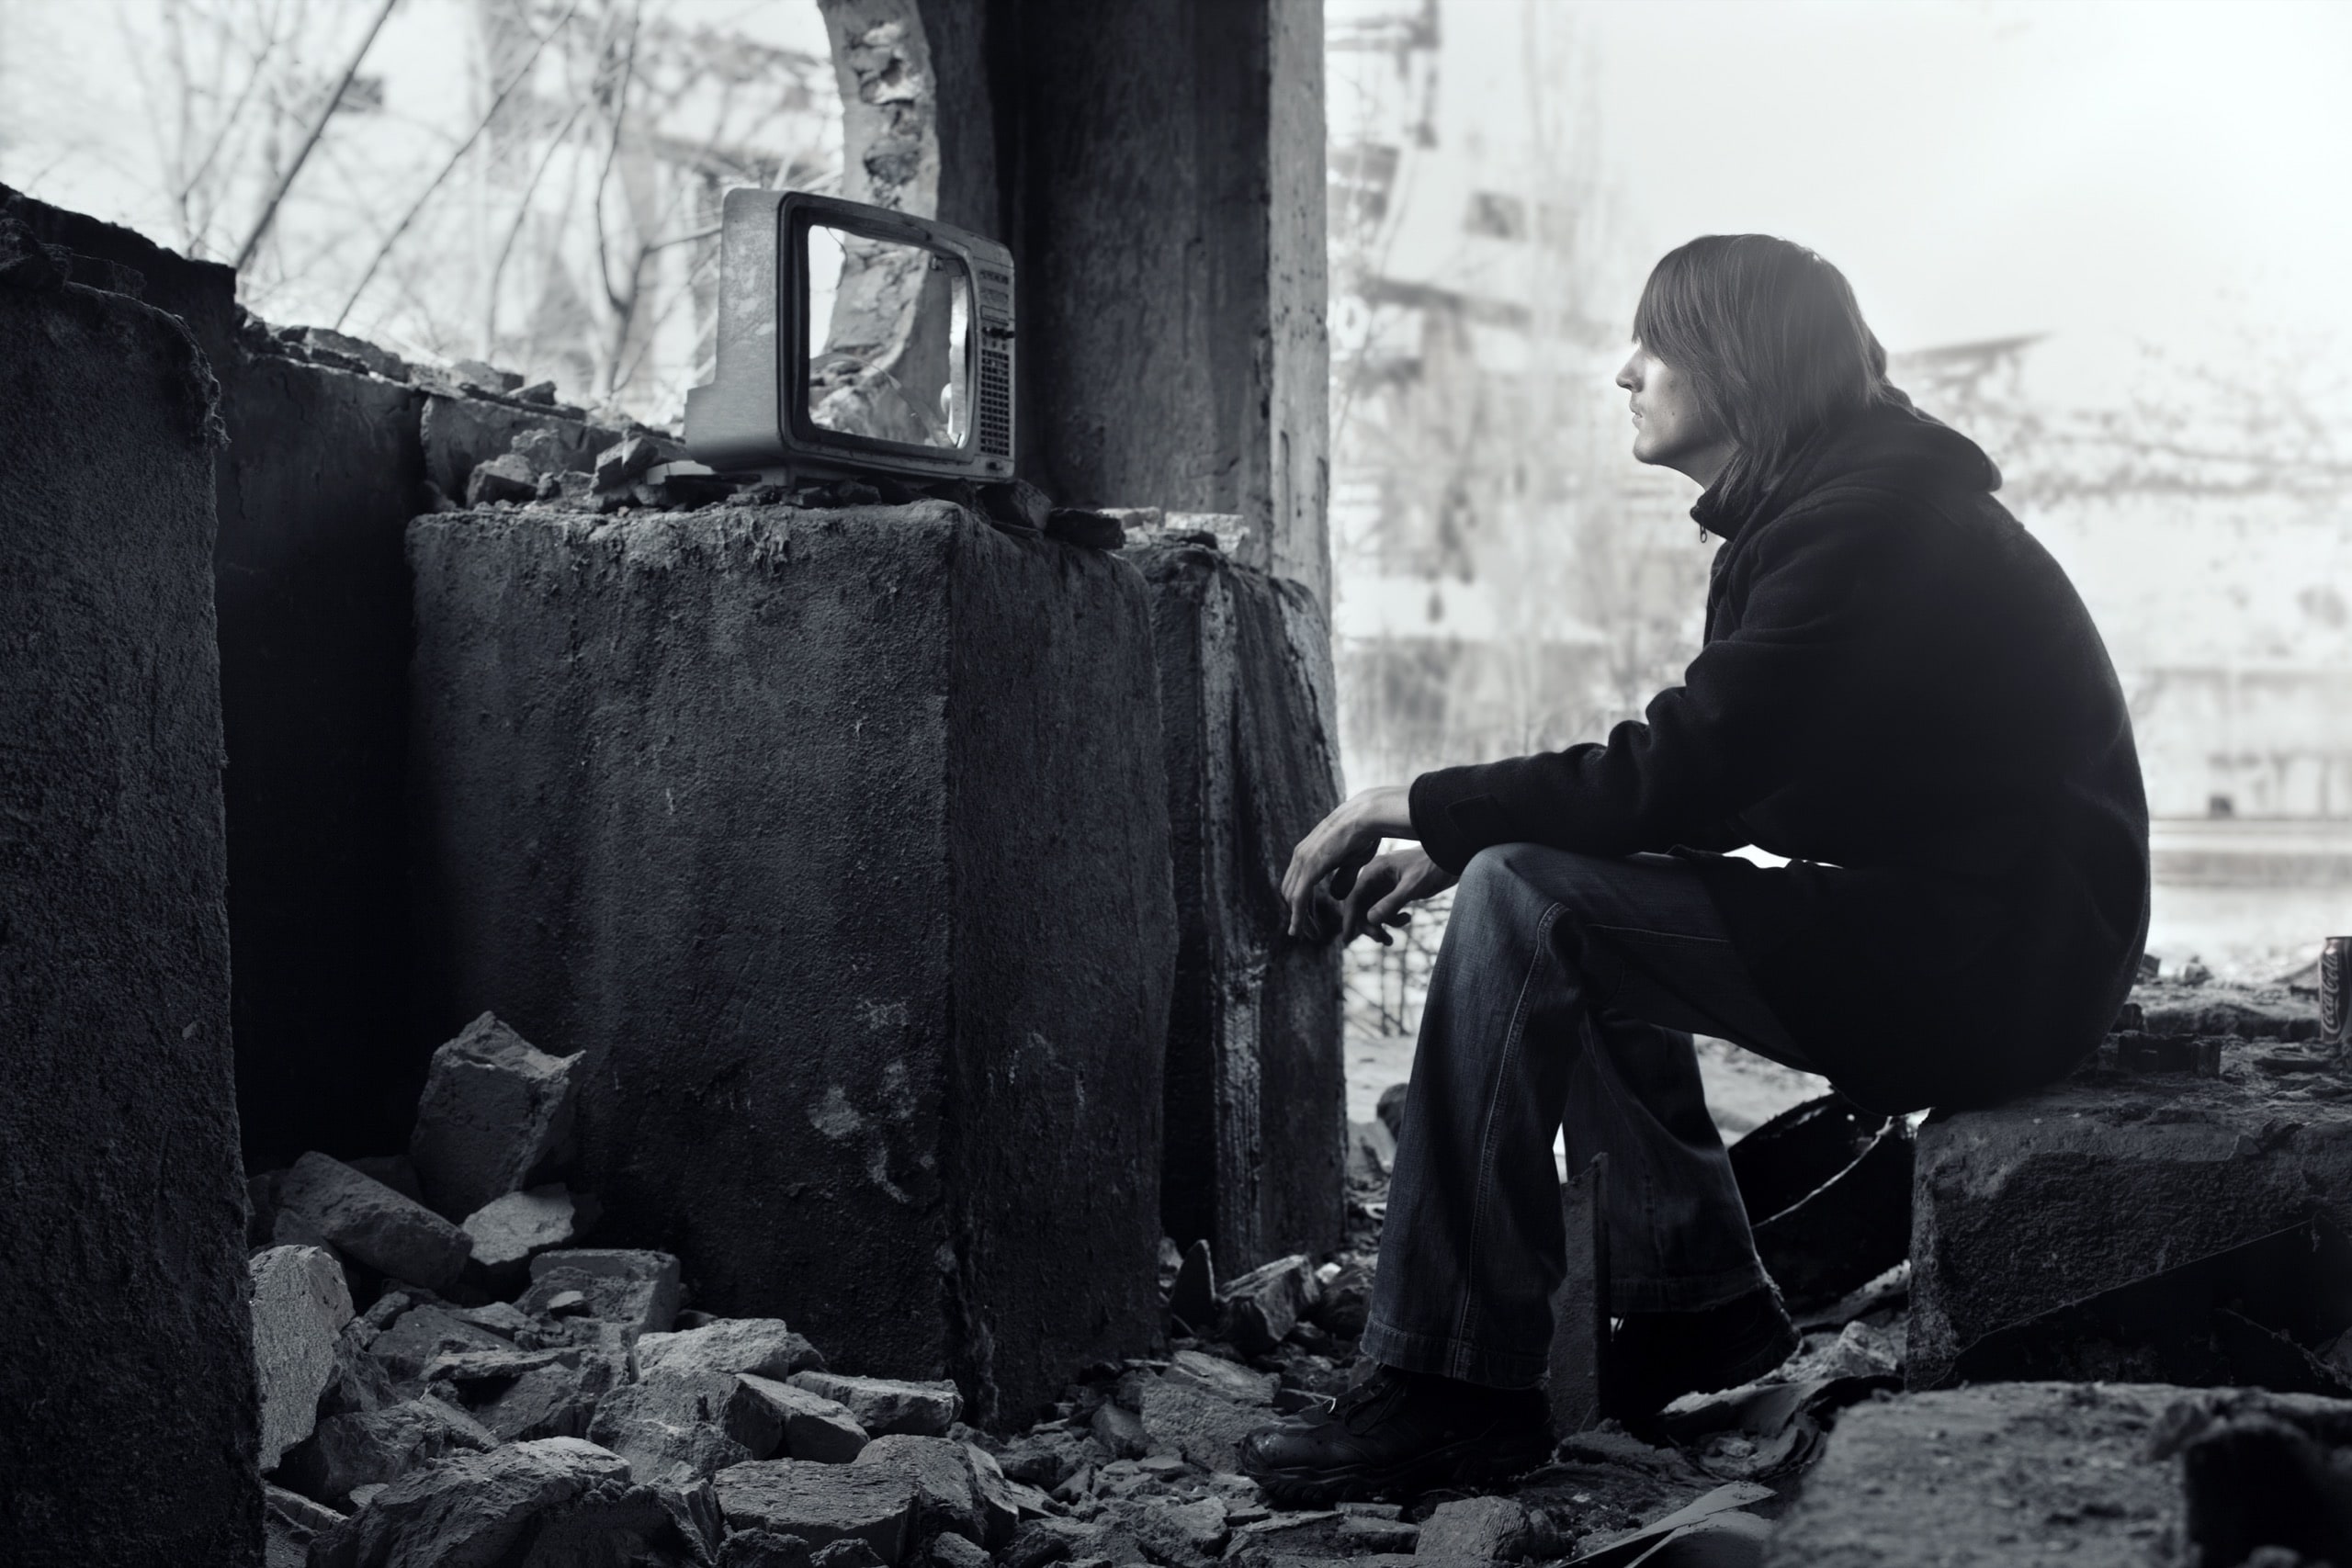 Homeless man watching broken TV-set in the ruined interior. Shallow depth of field due to the tilt lens for movie effect